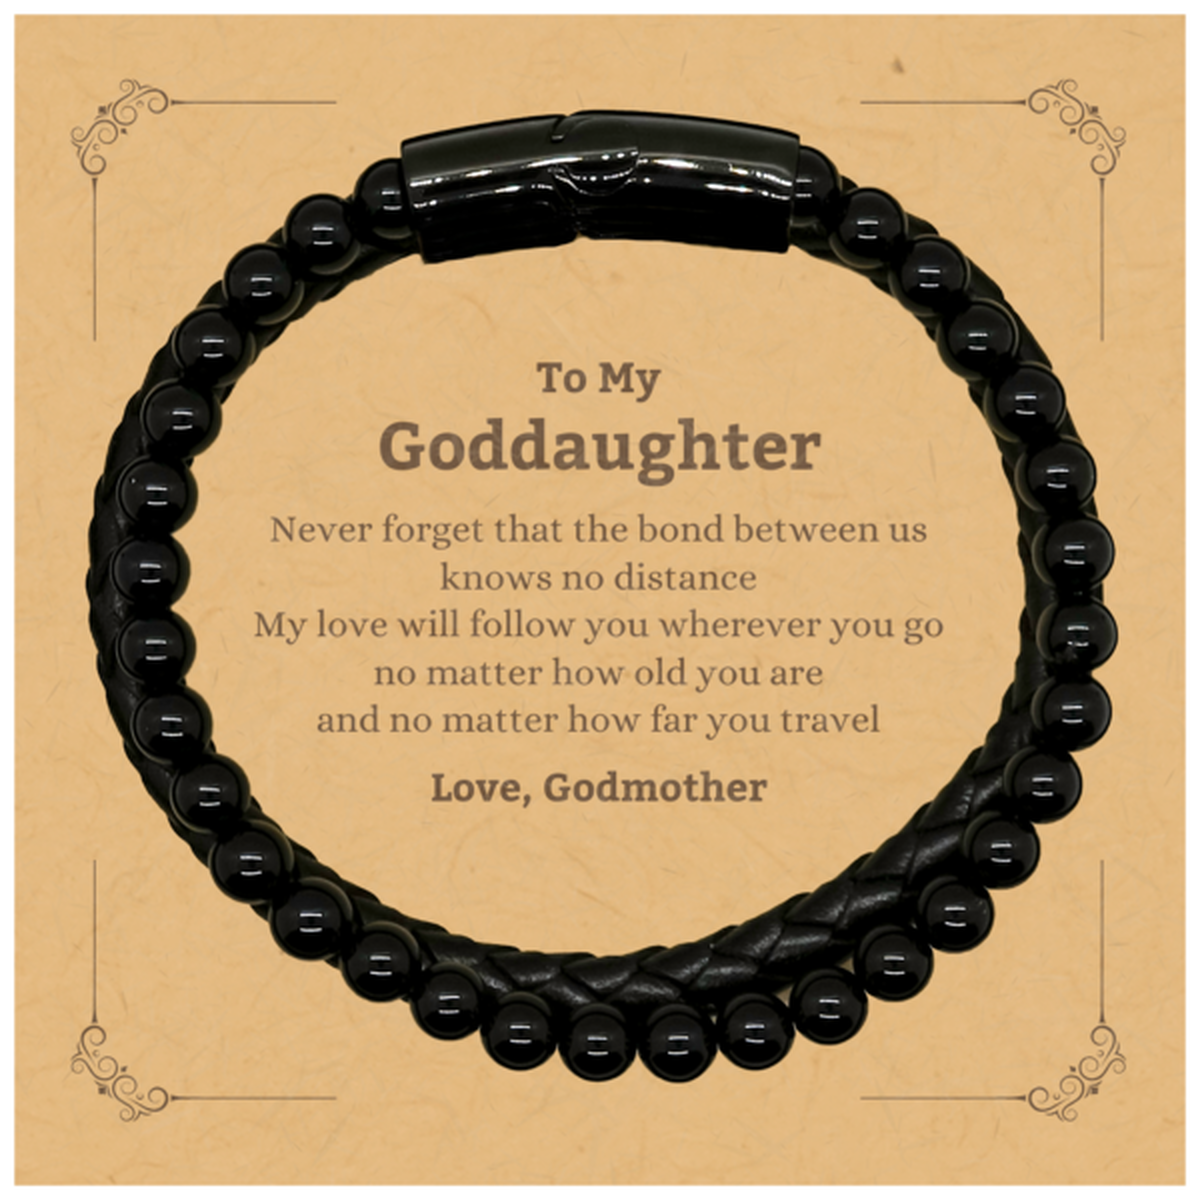 Goddaughter Birthday Gifts from Godmother, Adjustable Stone Leather Bracelets for Goddaughter Christmas Graduation Unique Gifts Goddaughter Never forget that the bond between us knows no distance. Love, Godmother